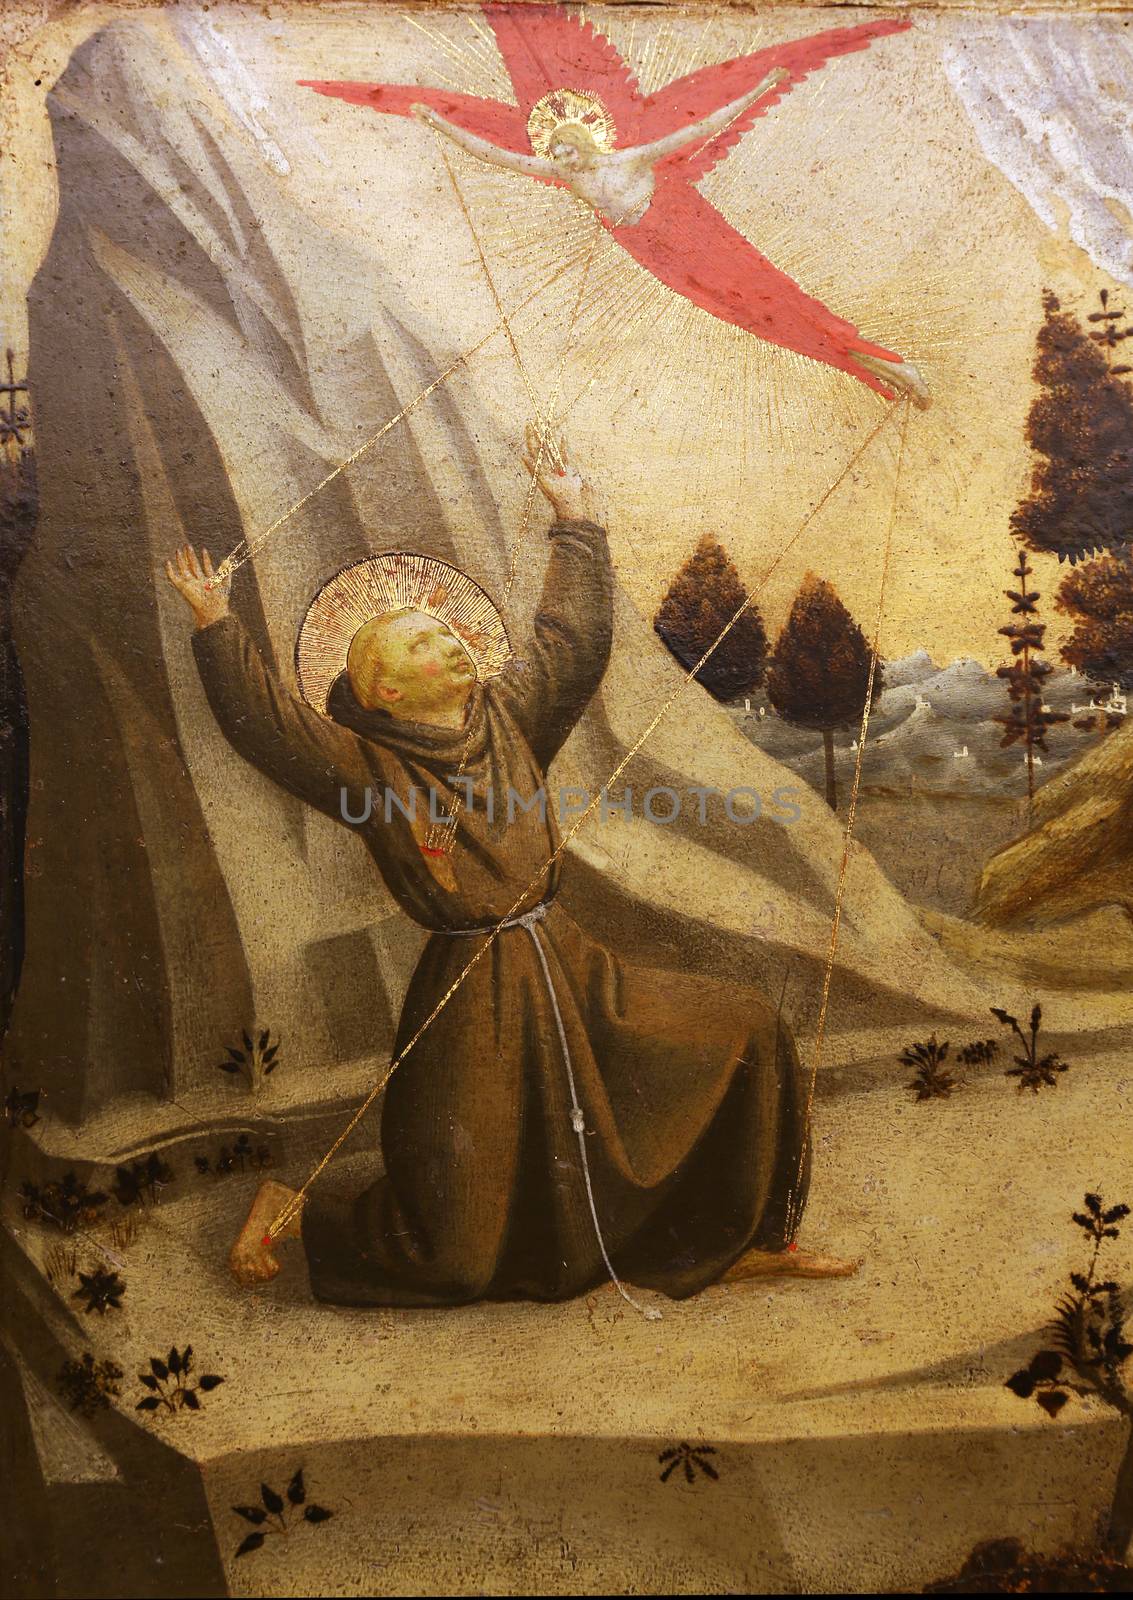 Fra Angelico: The stigmatization of St. Francis of Assisi, Old Masters Collection, Croatian Academy of Sciences in Zagreb, Croatia